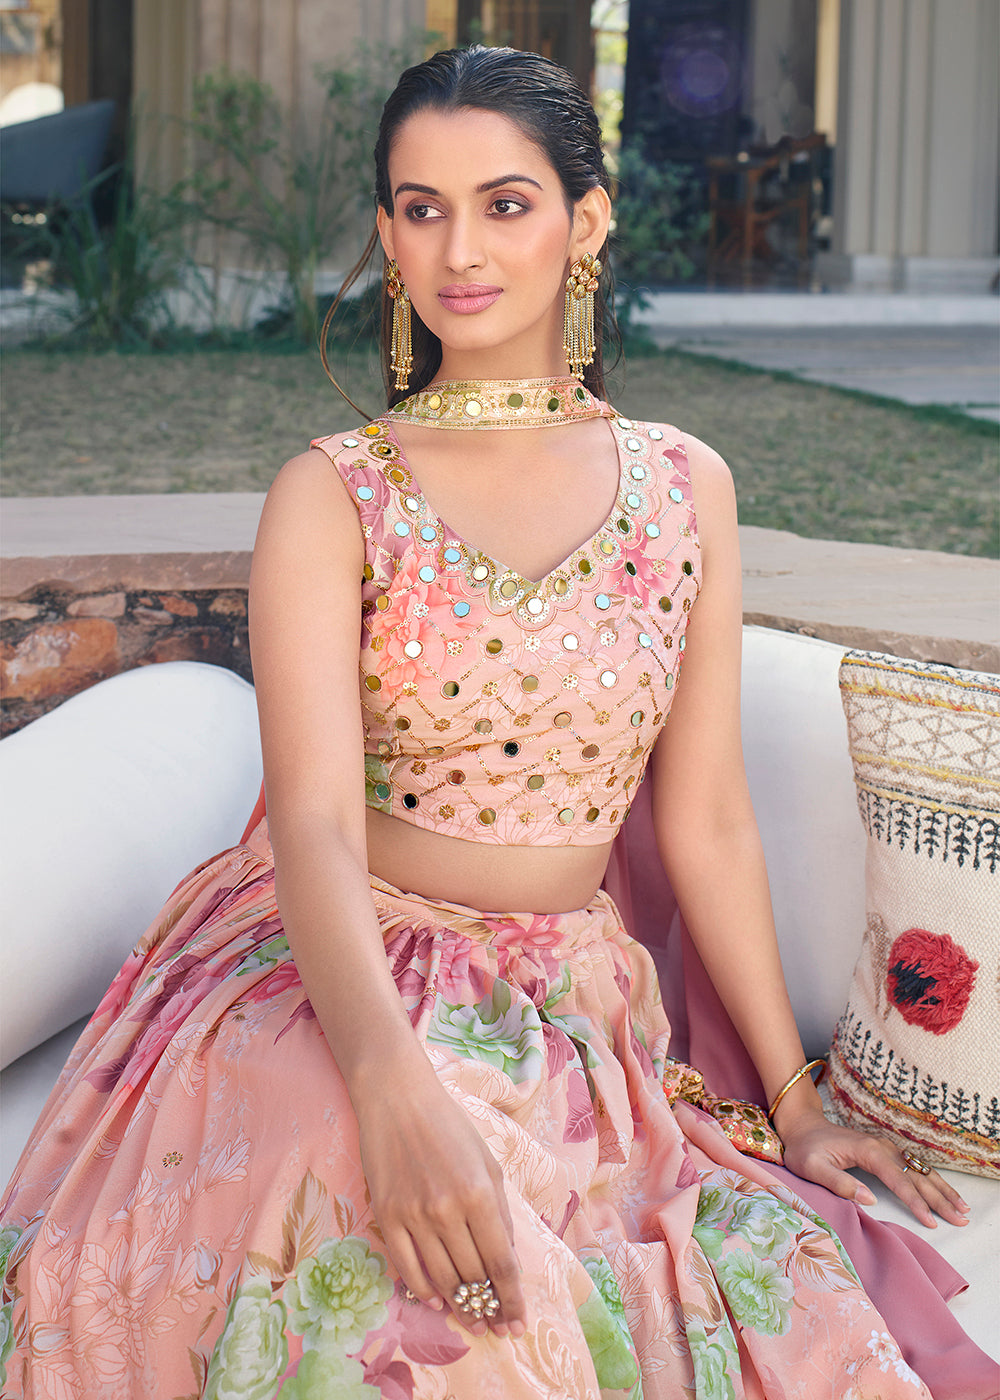 Buy Now Crystal Floral Pink Printed Embroidered Designer Lehenga Choli Online in USA, UK, Canada & Worldwide at Empress Clothing. 